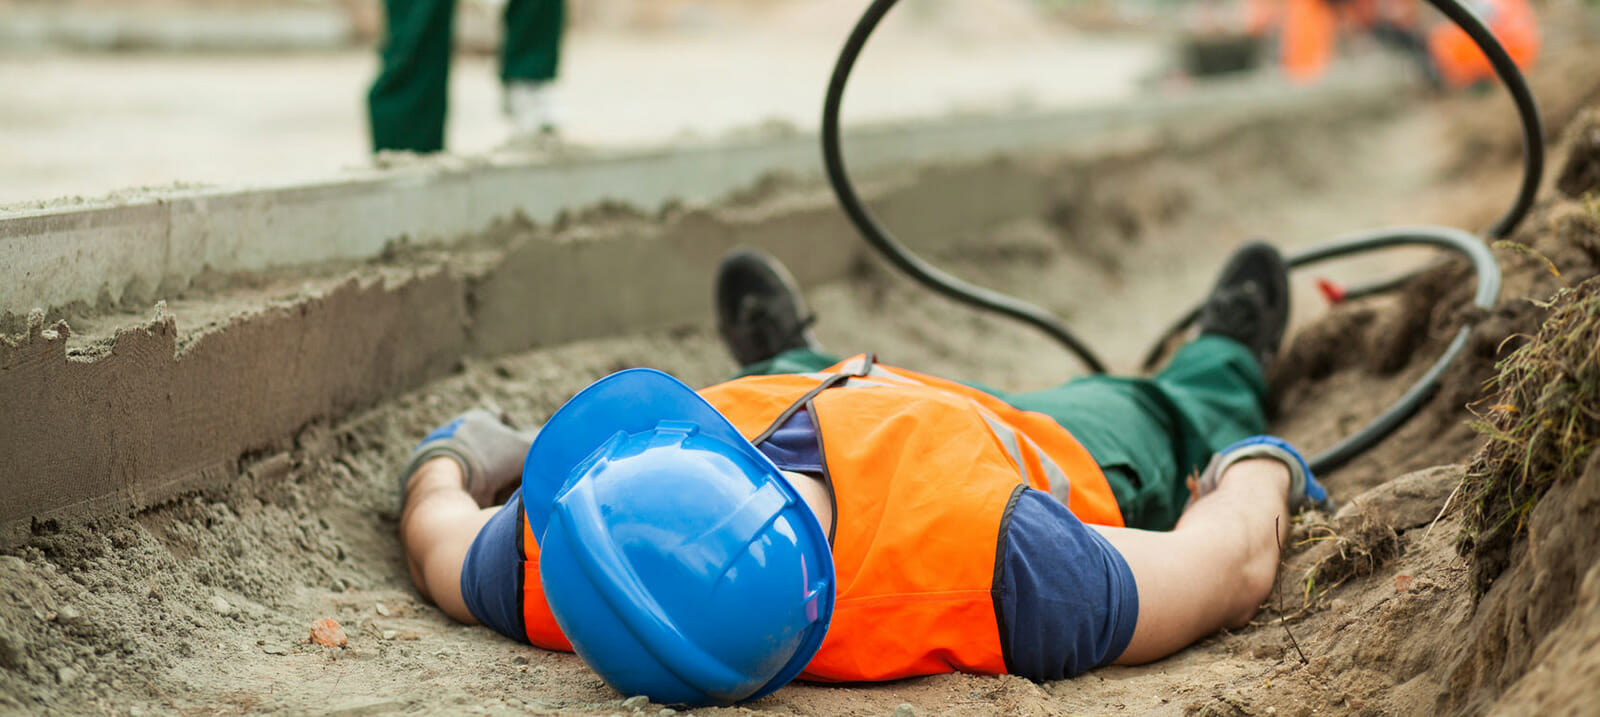 Columbus, Indiana workers compensation lawyer